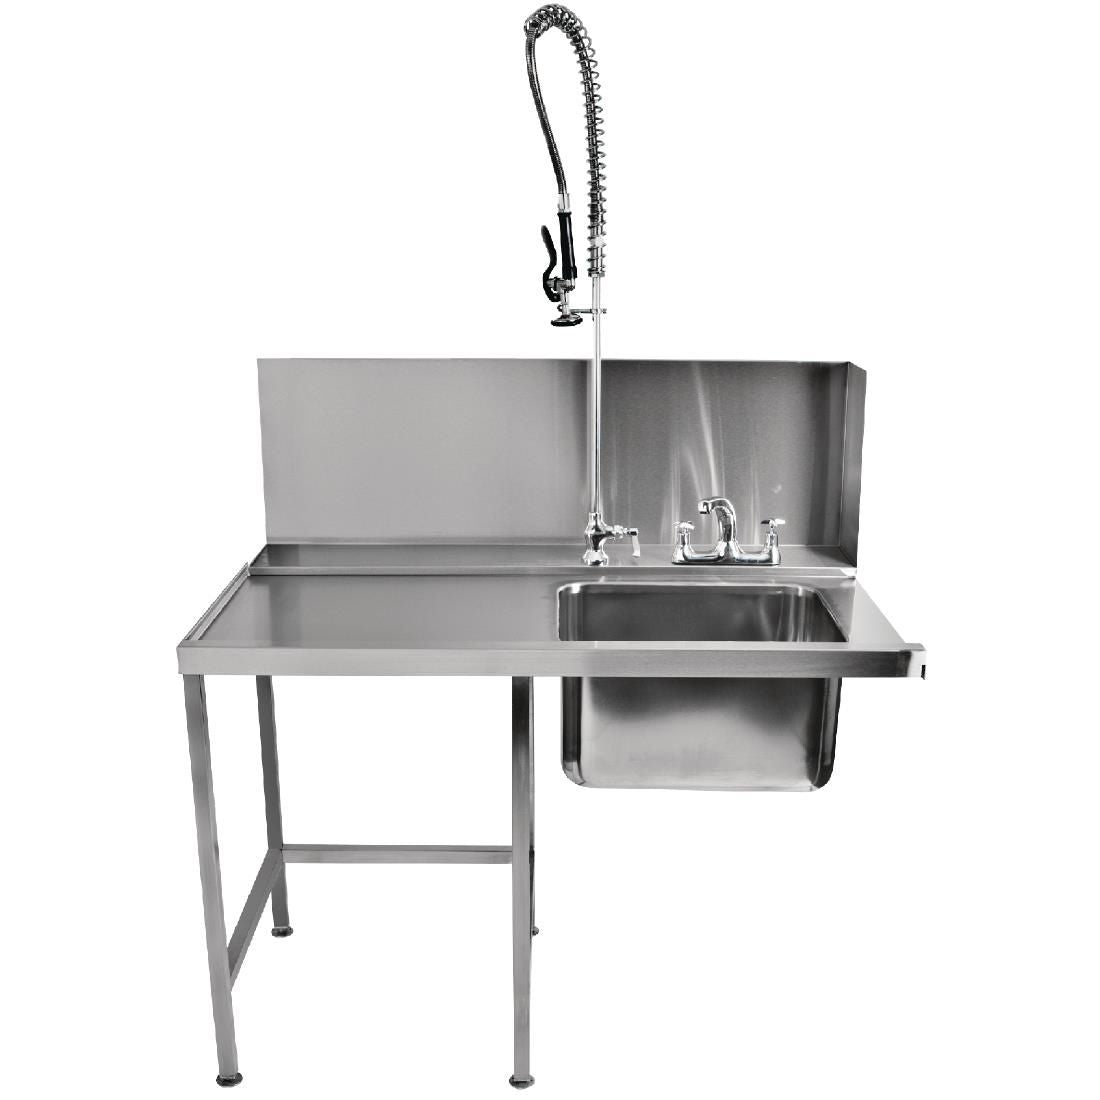 GD925 Classeq Pass-Through Table with Spray Mixer T11SENL JD Catering Equipment Solutions Ltd